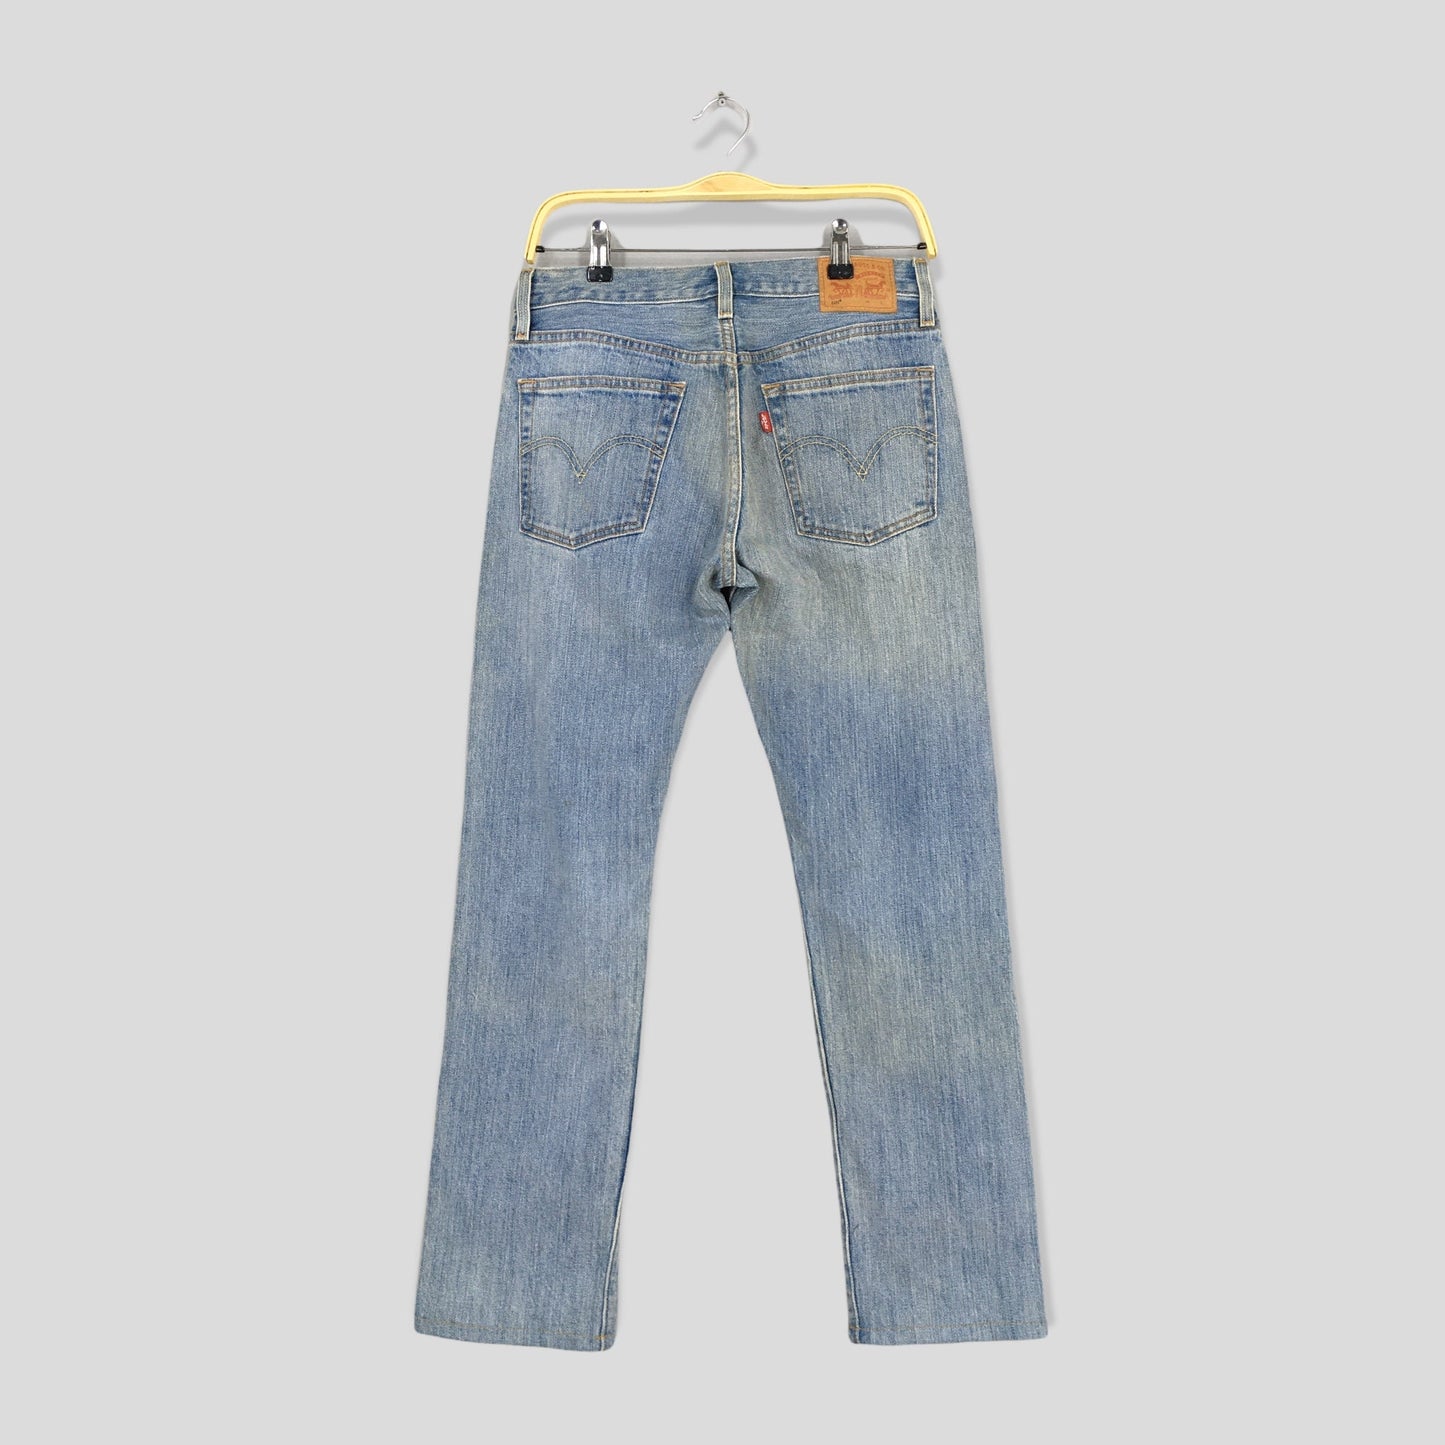 Levis 501 Faded Blue Jeans Size 28x28